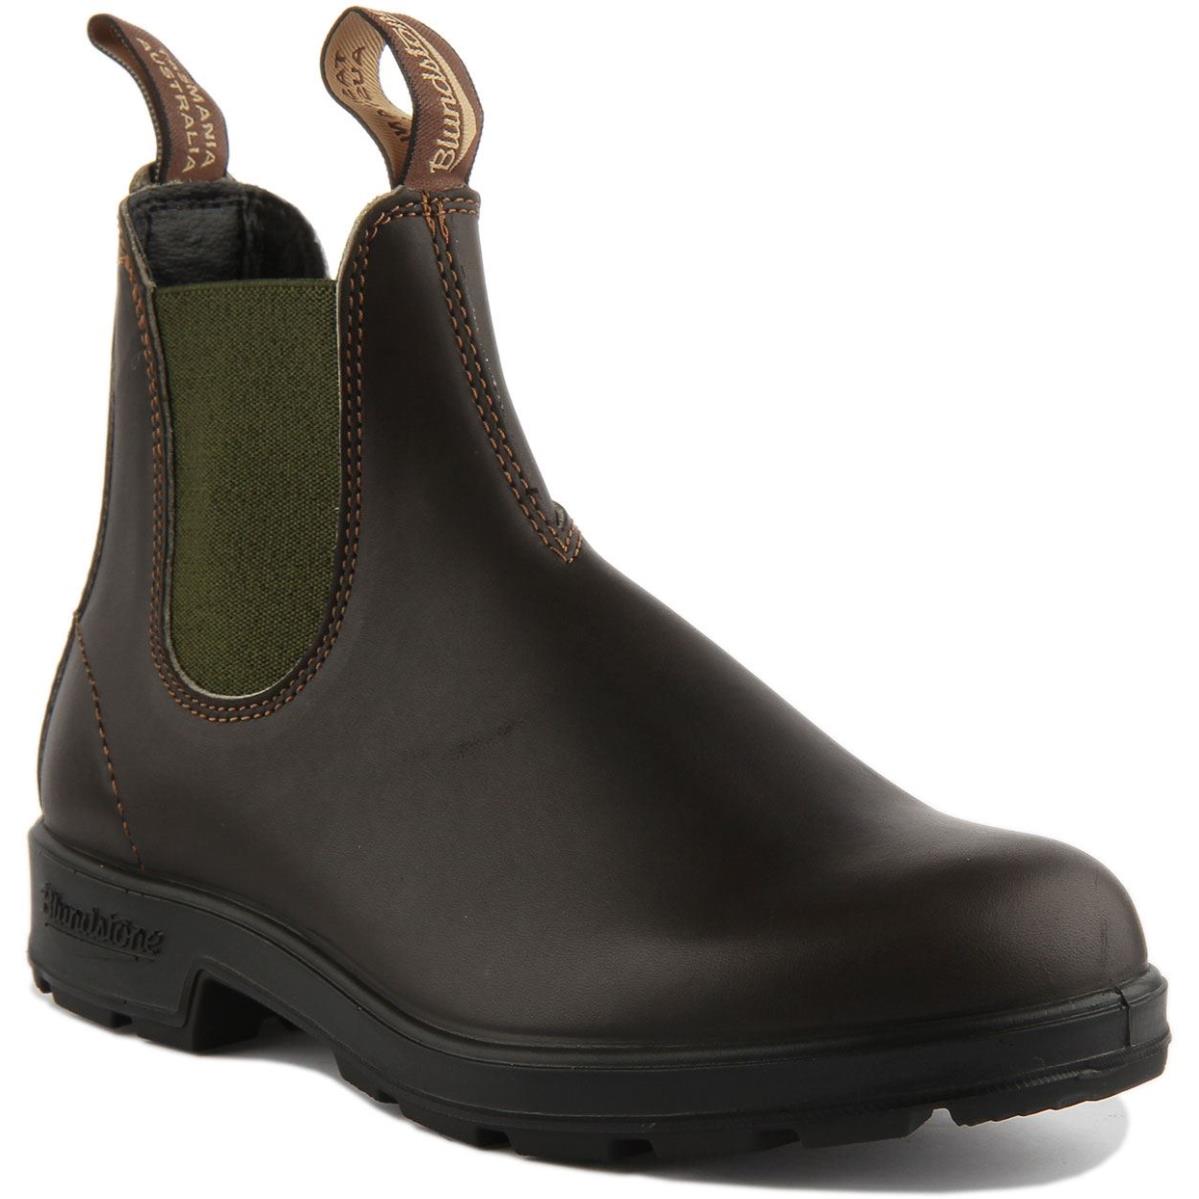 Blundstone 519 Unisex Pull On Leather Chelsea Boot In Brown Olive Size US 4 - 13 BROWN OLIVE